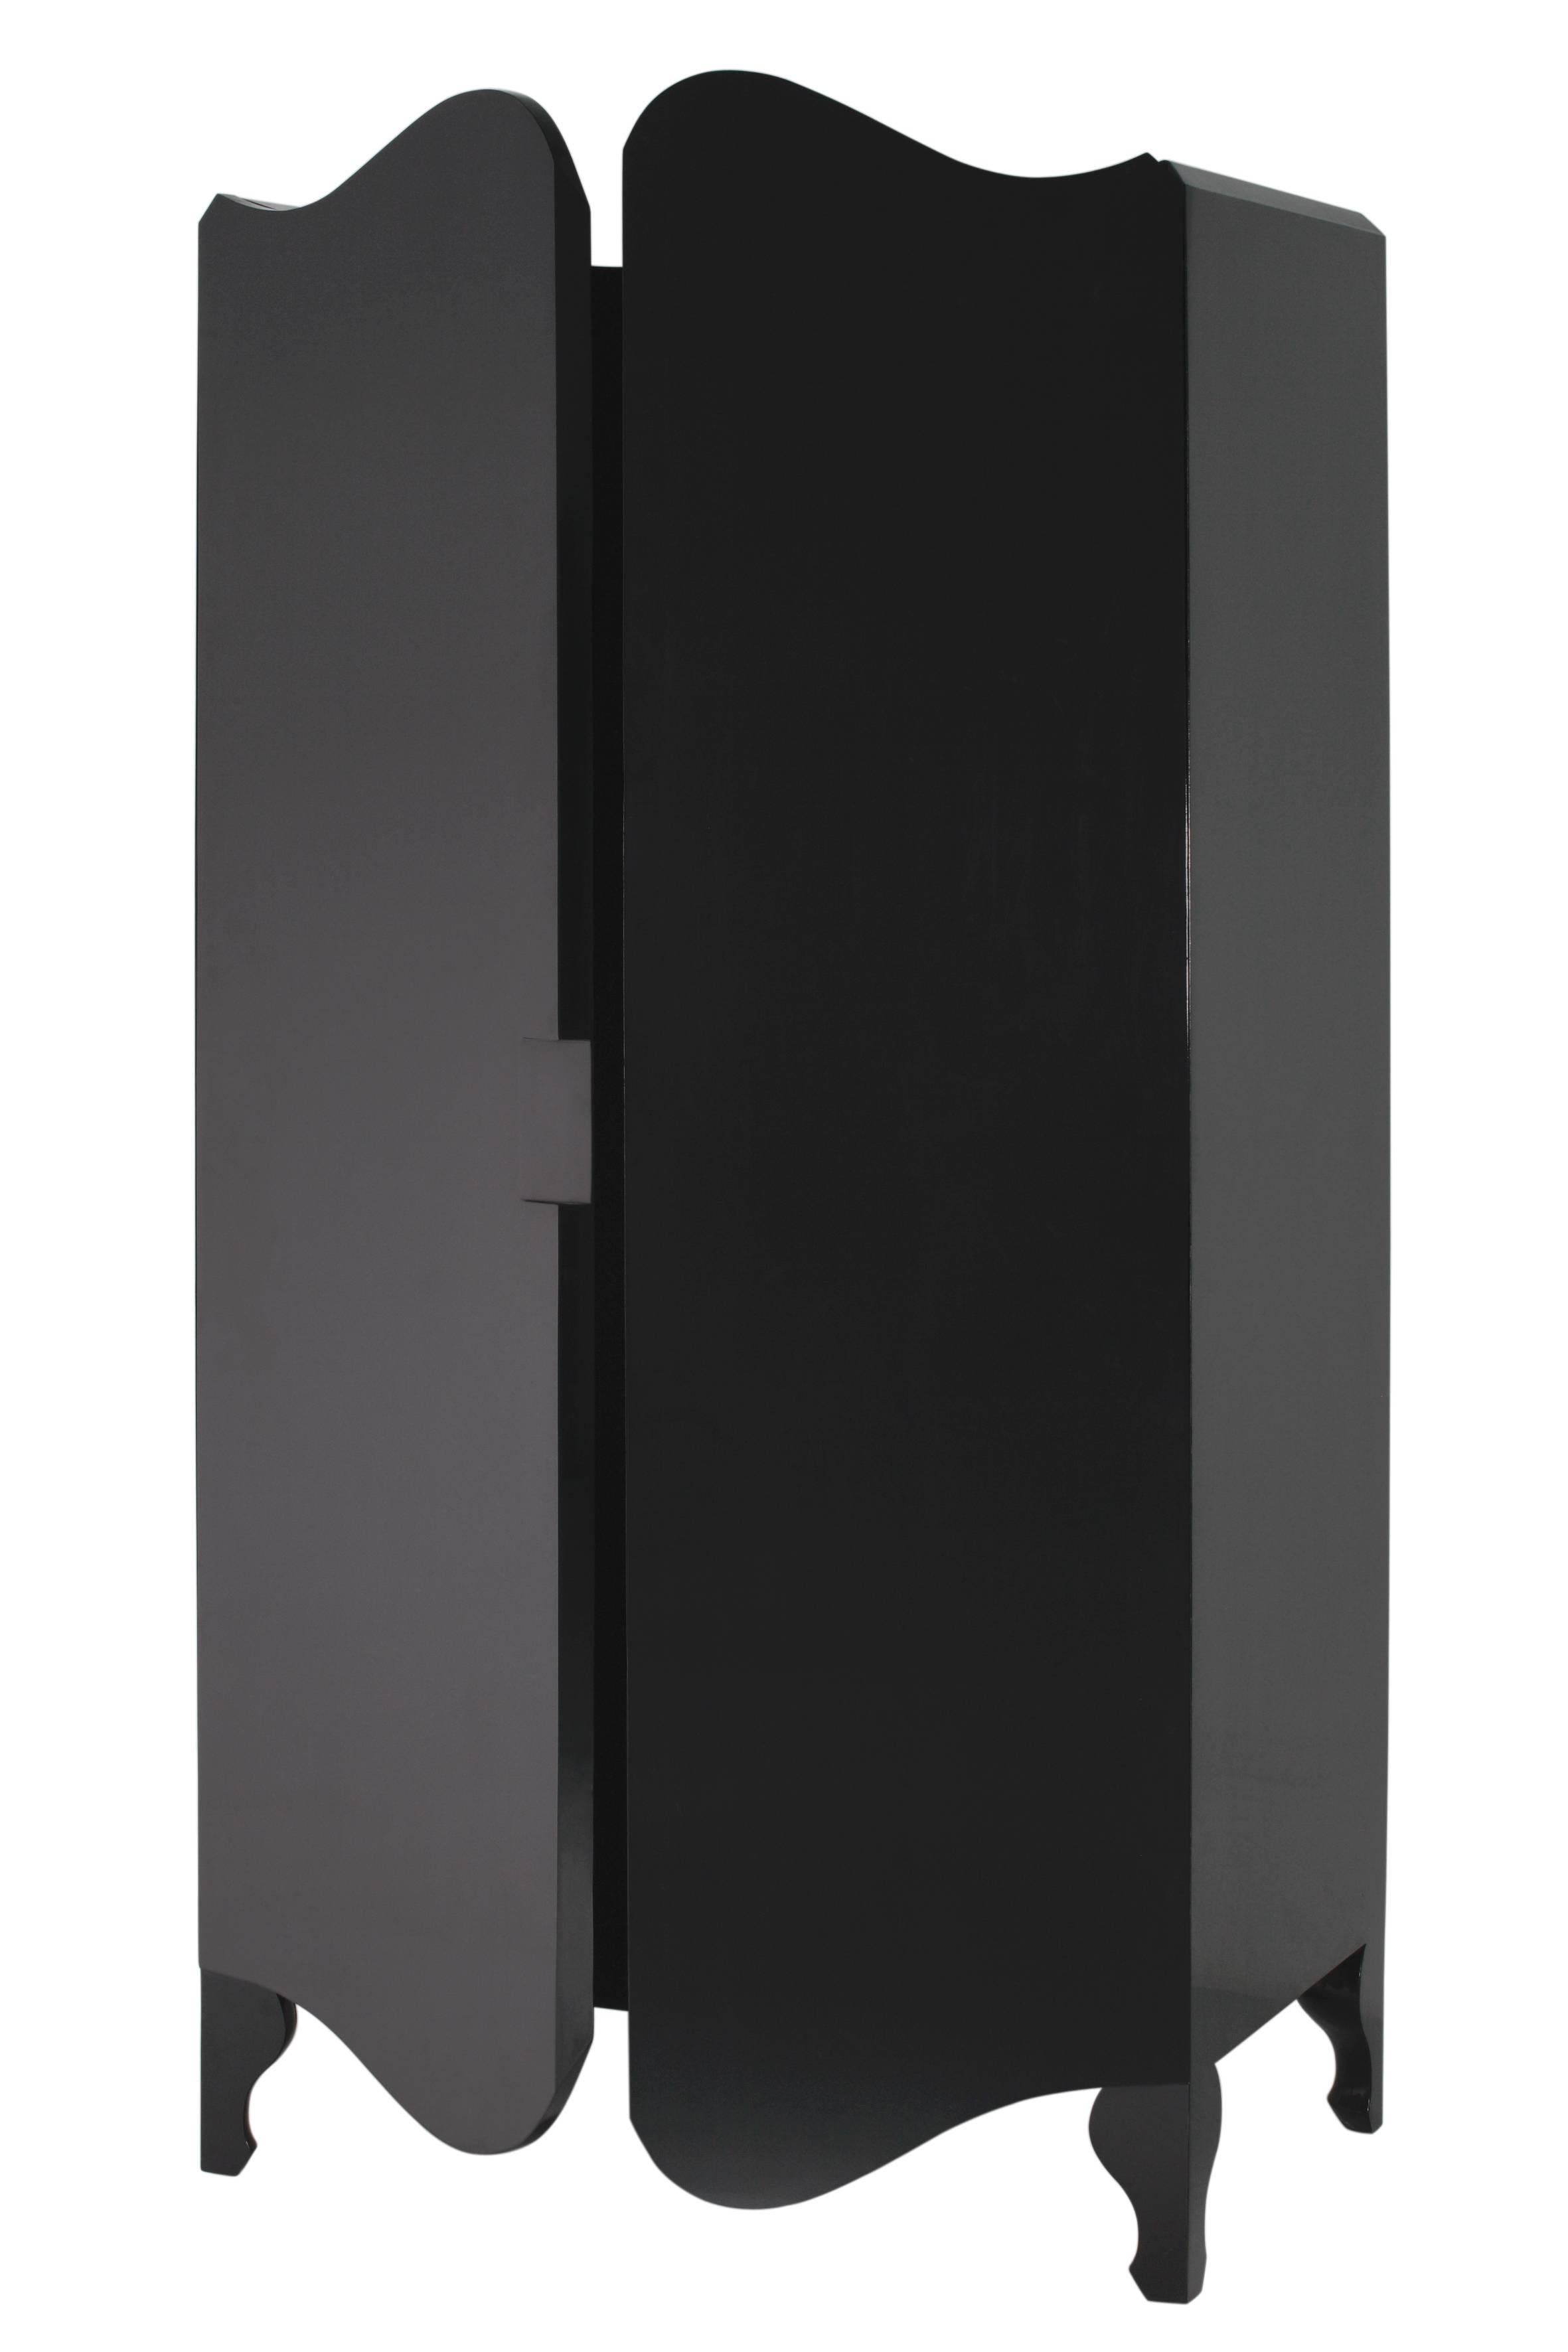 A tall handsome armoire whose curves may be finer than your own. Includes one adjustable shoe shelf and matching metal hanging rail inside. Extremely sturdy and fully knock down for self-assembly.

Material: Tough polyurethane lacquer on MDF, powder